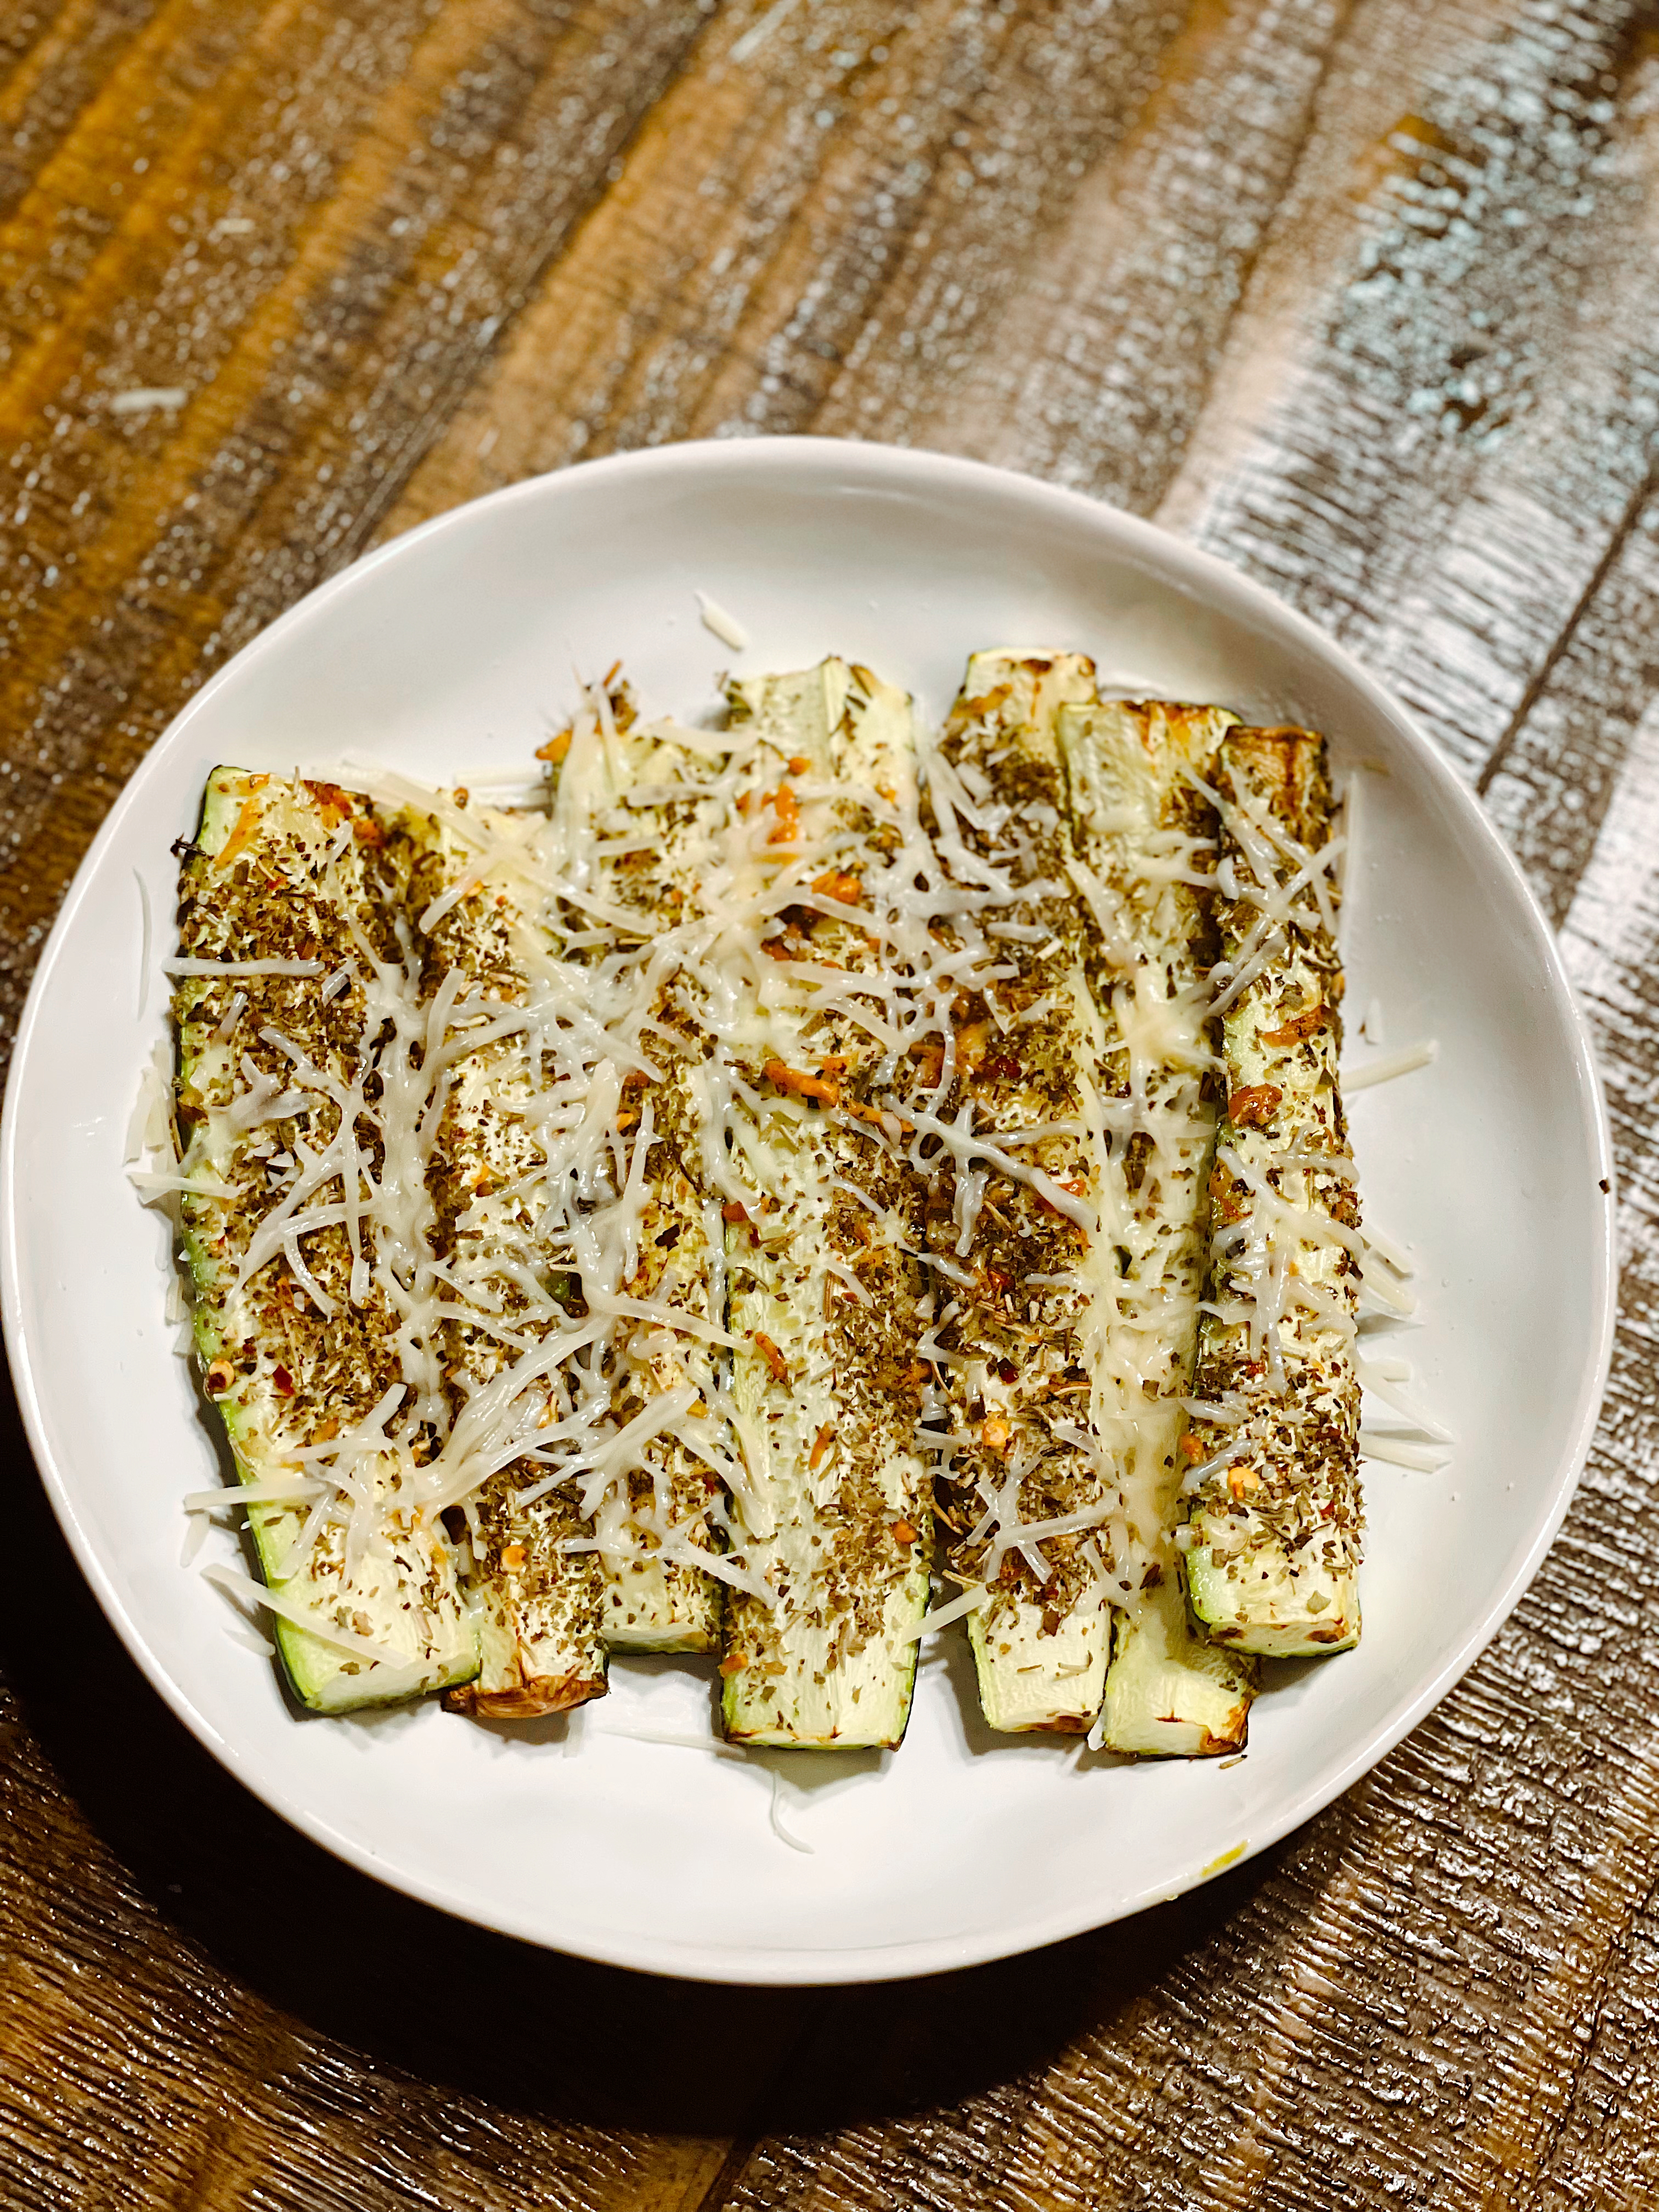 Top Nashville Lifestyle blogger, Nashville Wifestyles shares her Delicious Air Fried Zucchini Parmesan Recipe! Click here to check it out!